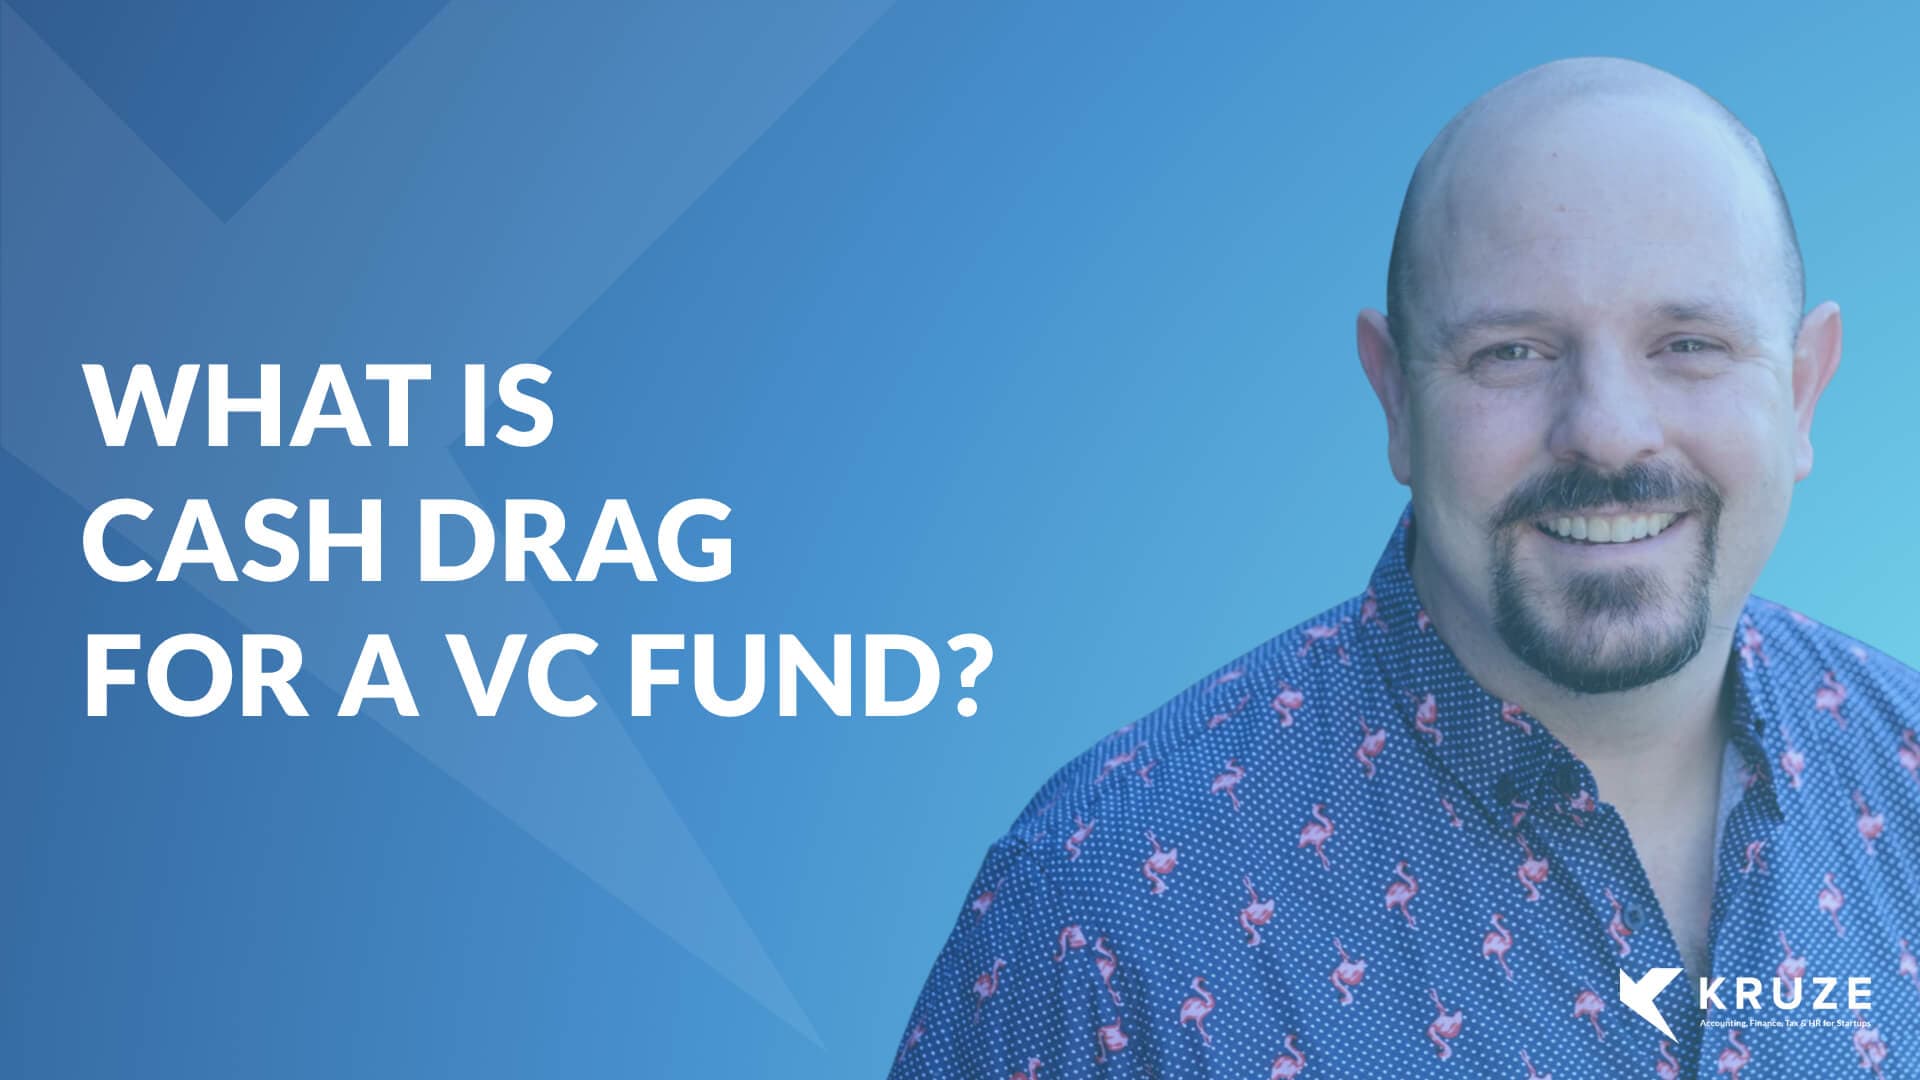 What Is Cash Drag For A VC Fund